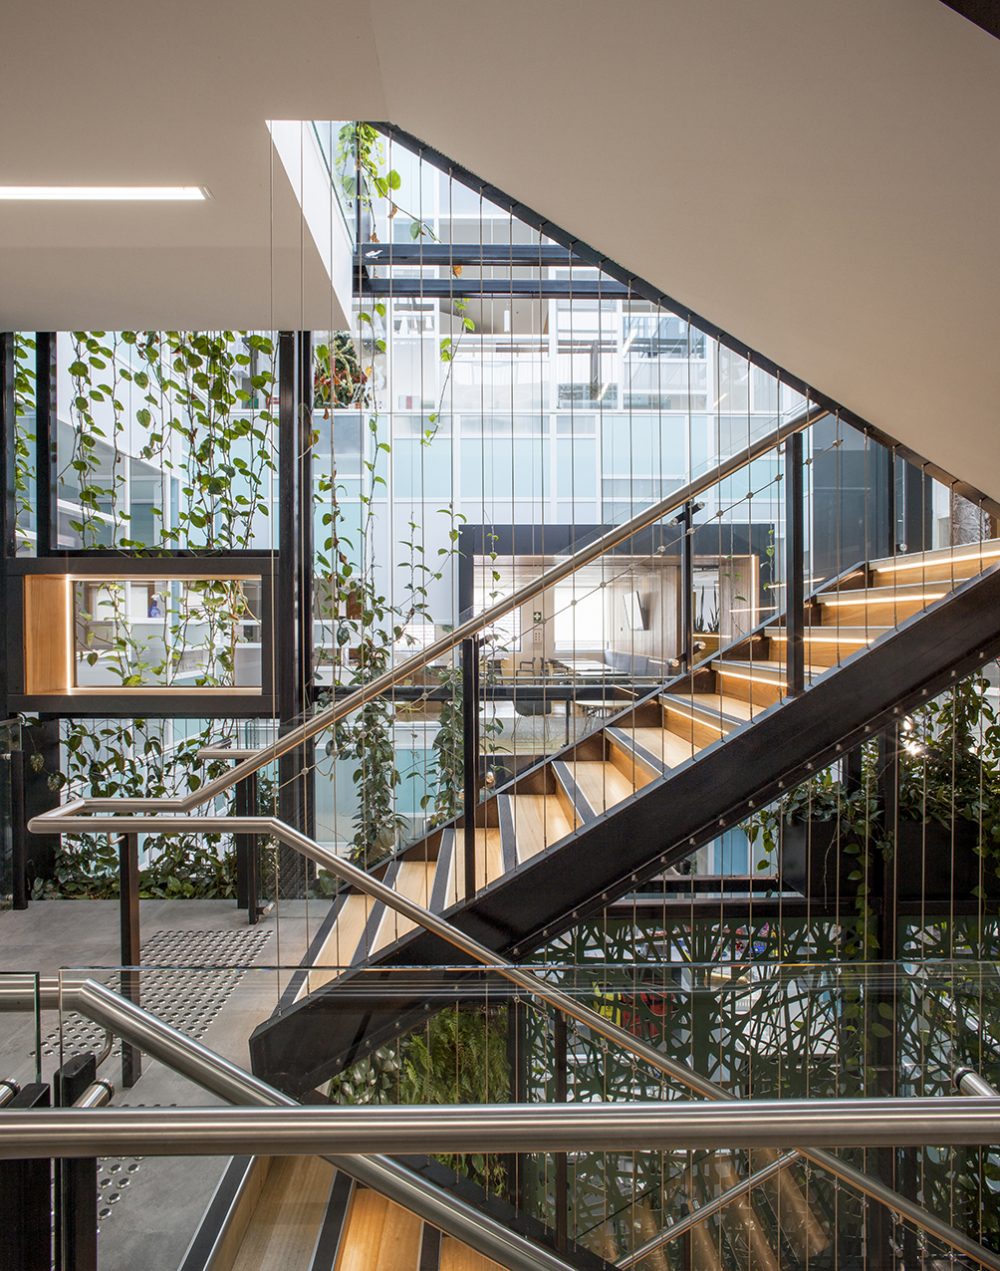 Bringing the Outdoors In Through Internal Green Spaces / Tensile Design & Construct